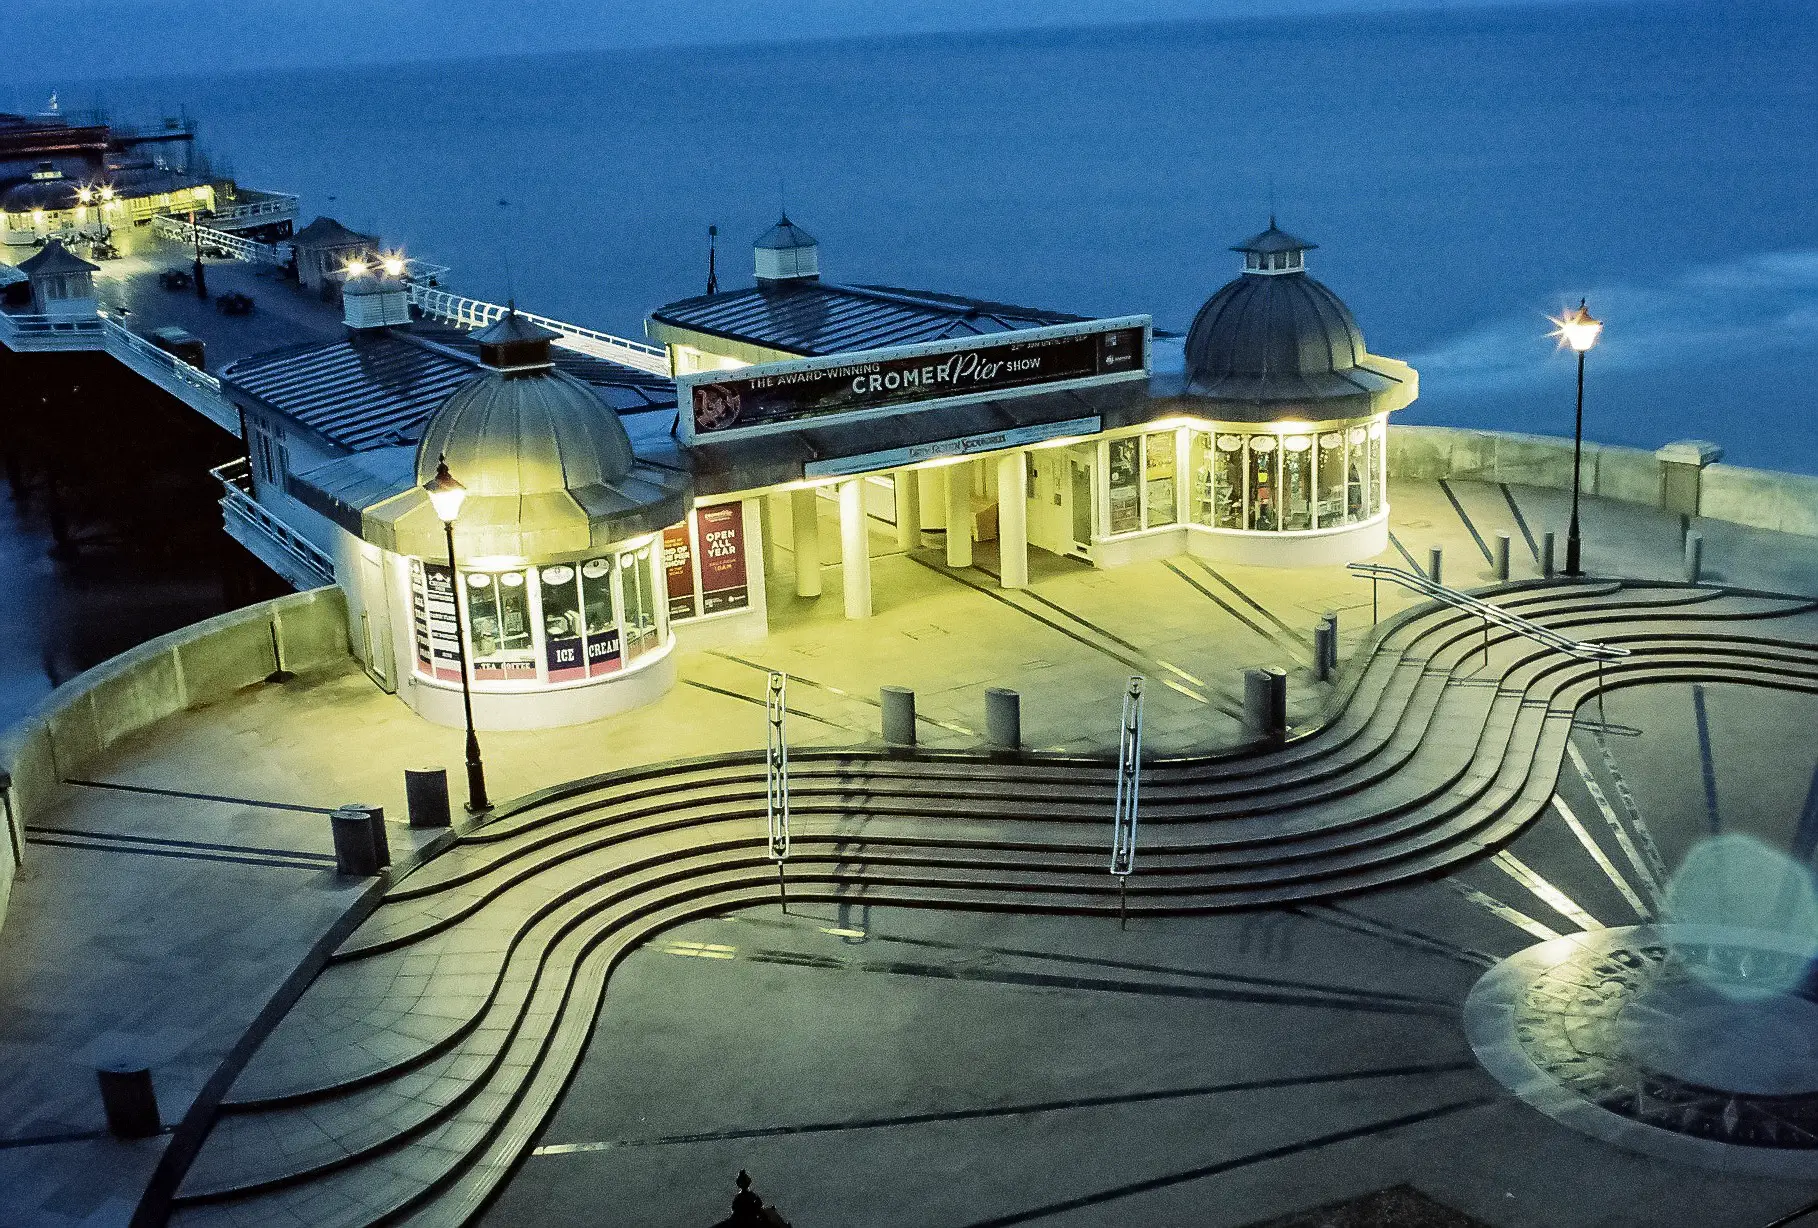 Looking down onto the entrance to Cromer Pier. It's empty of people and the lights tinkle through the darkening night